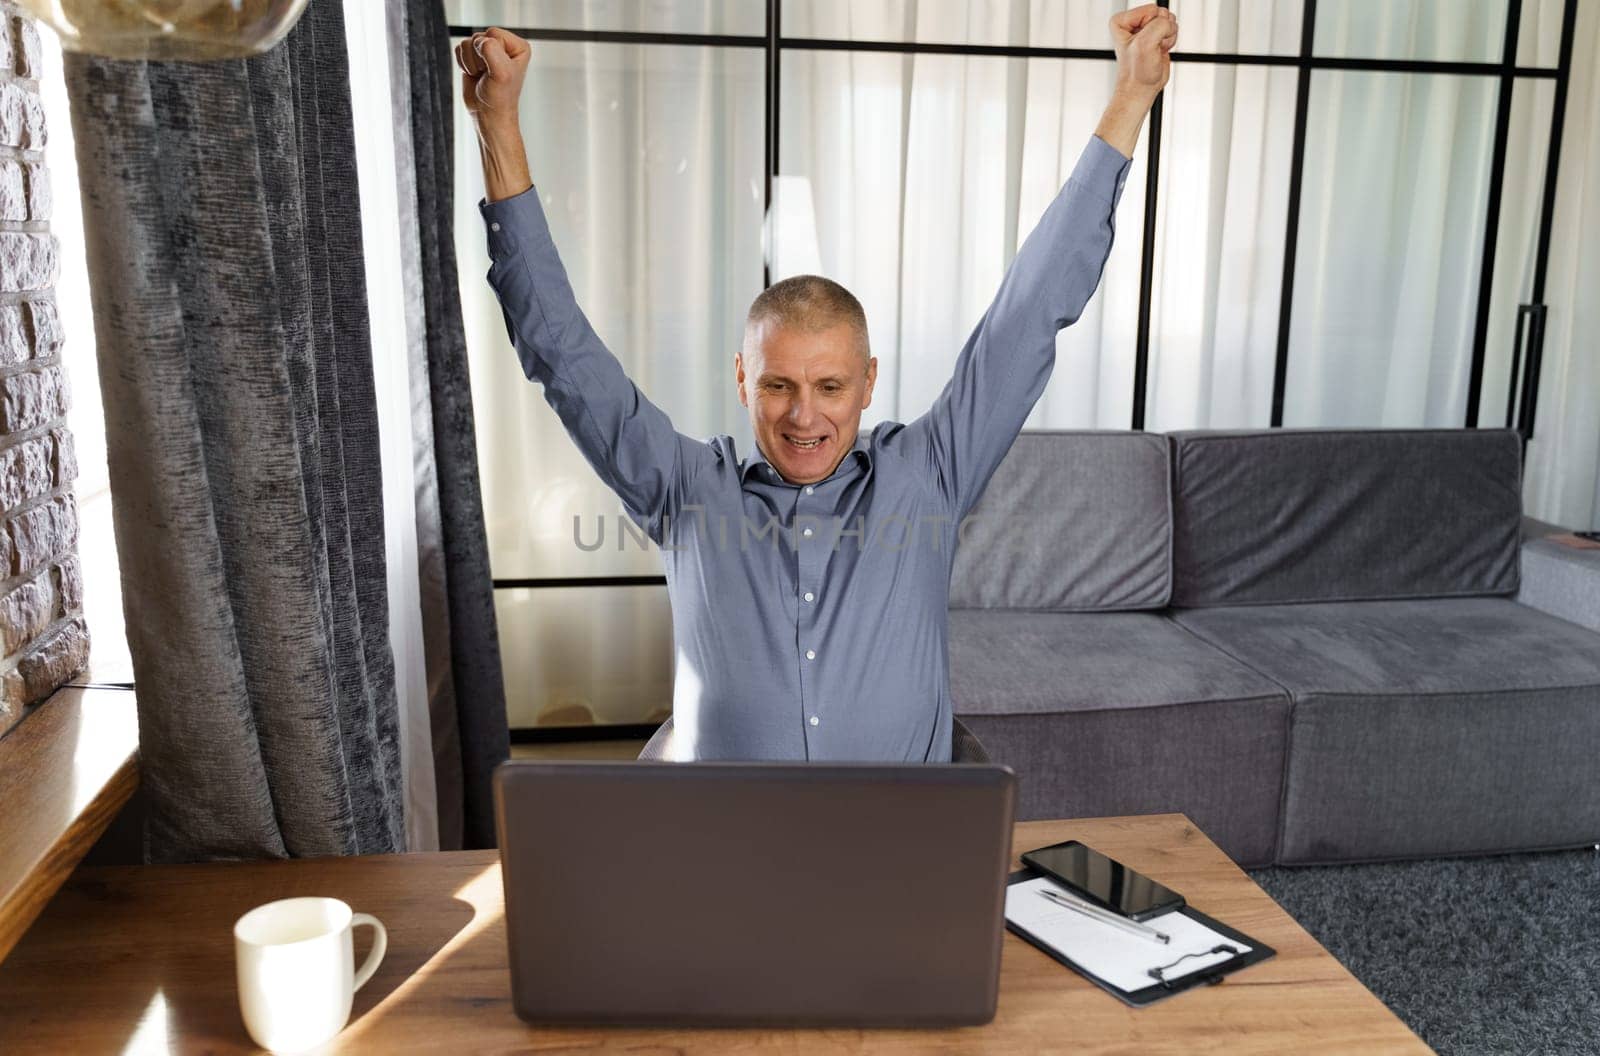 A businessman working at a computer rejoices at a successful deal. by Sd28DimoN_1976